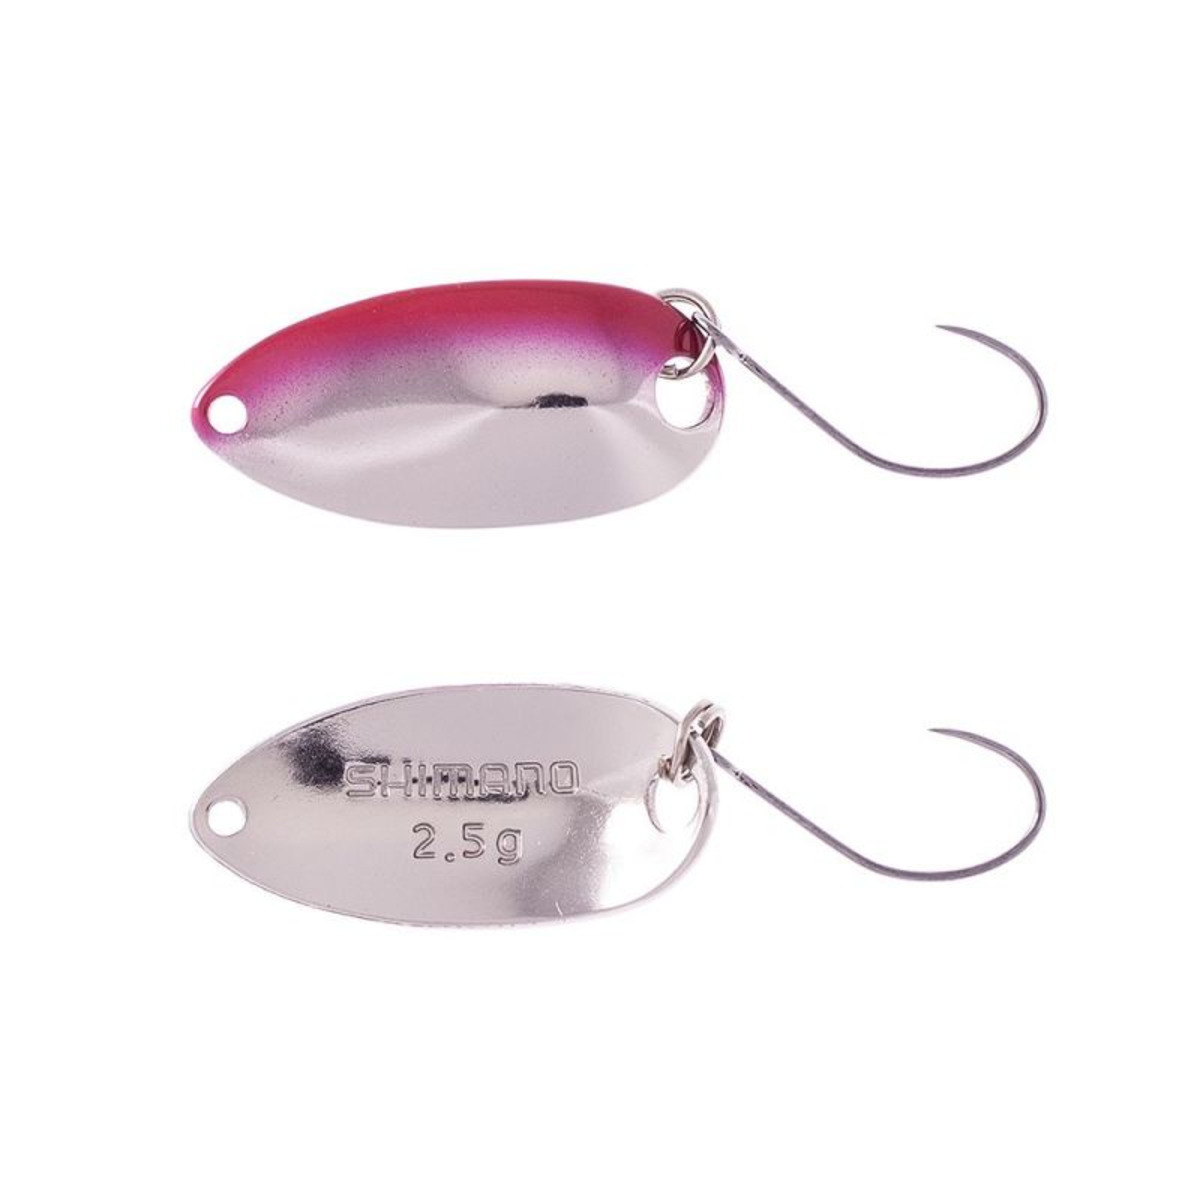 Shimano Cardiff Roll Swimmer - 2.5 g - Pink Silver